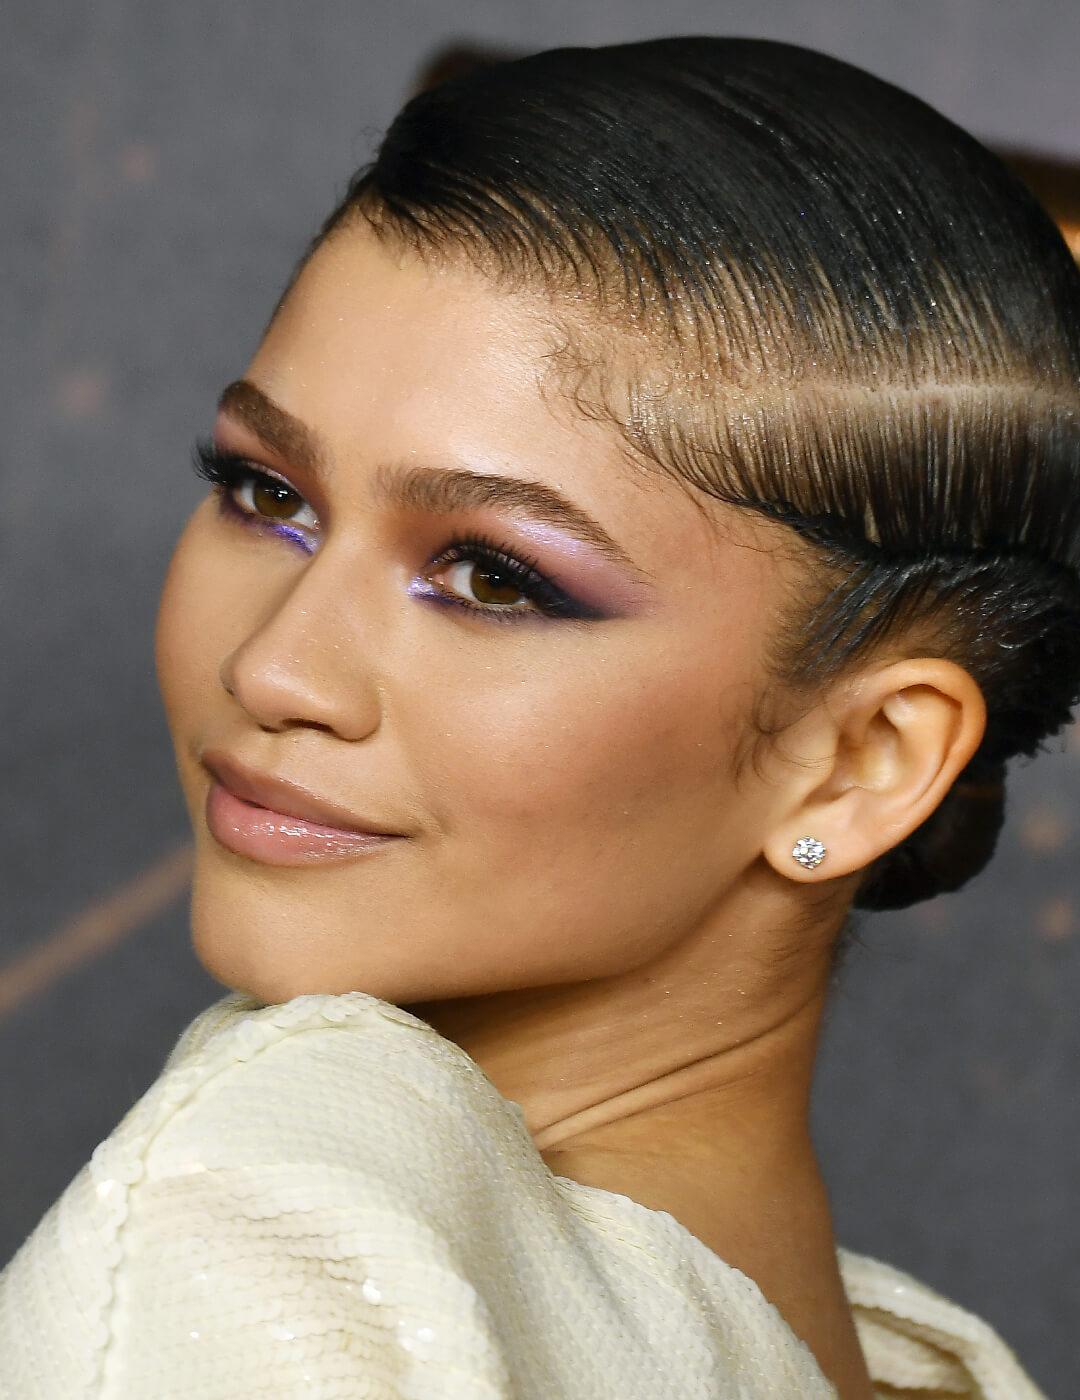 Zendaya rocking a bold periwinkle eye makeup look and white sequined dress